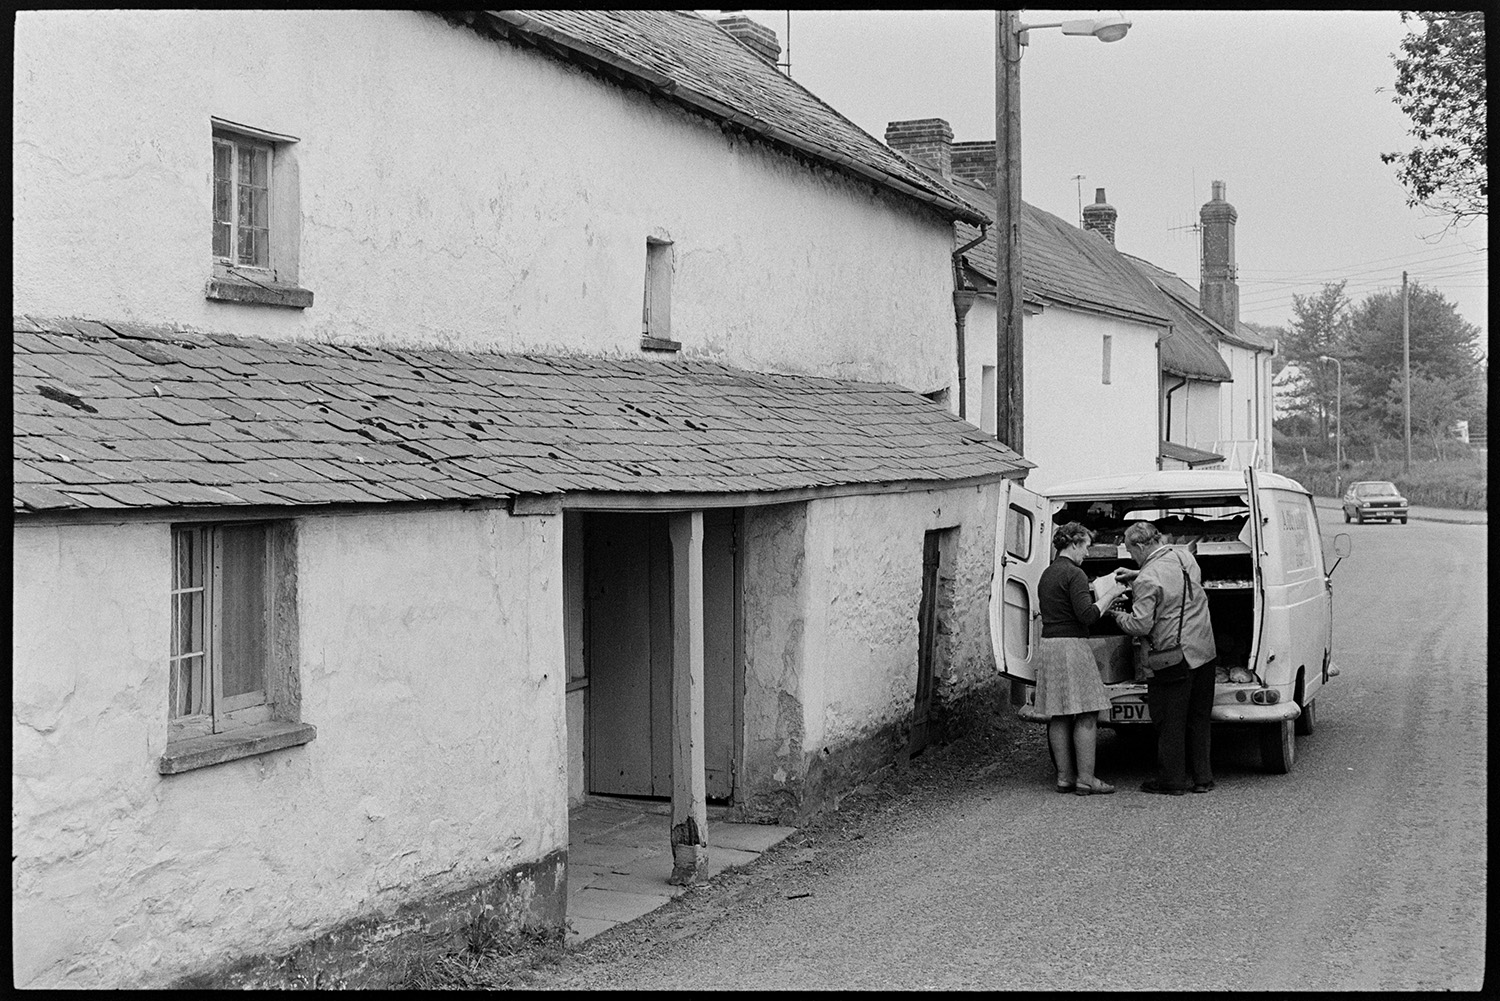 Bakers van in front of house with interesting doorway, now enlarged and ruined as usual!!! 
[A woman buying goods from a baker's van parked in front of cottages with a long porch at Rectory Road, Dolton. The cottages were later renovated.]